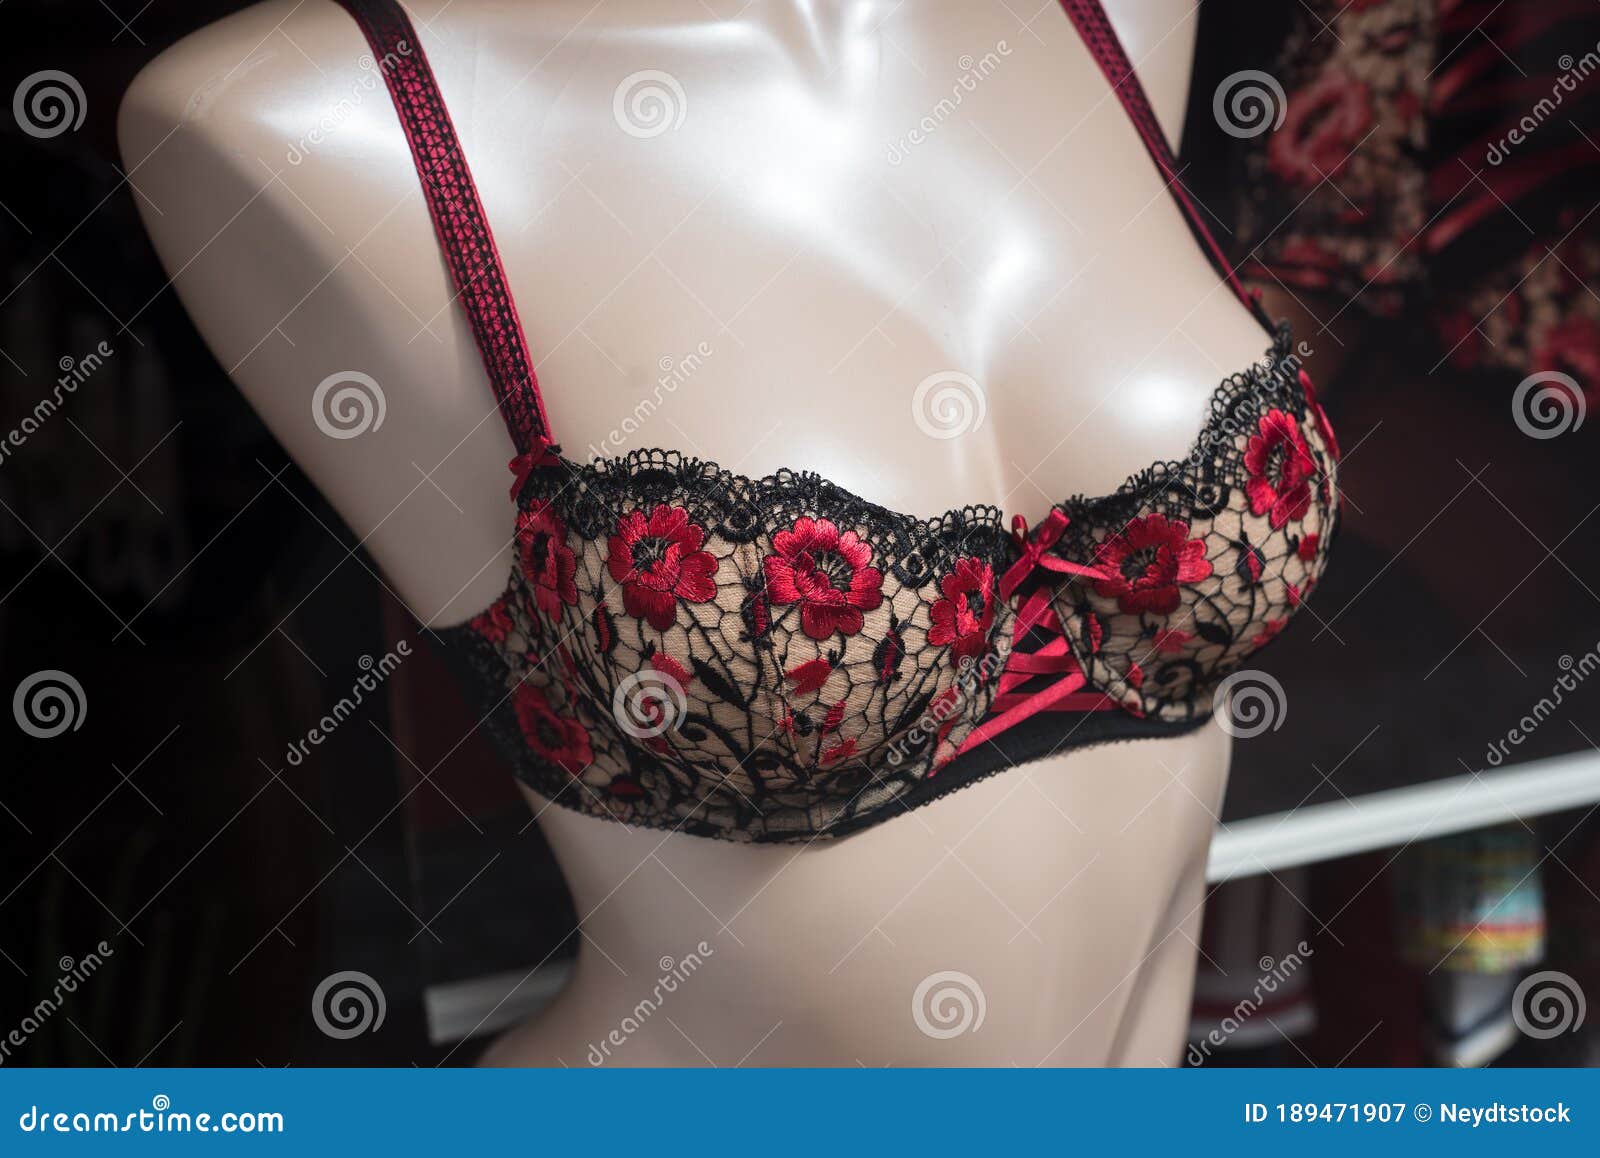 Closeup Red Leather Bra Mannequin Fashion Store Showroom Stock Photo by  ©NeydtStock 405824060